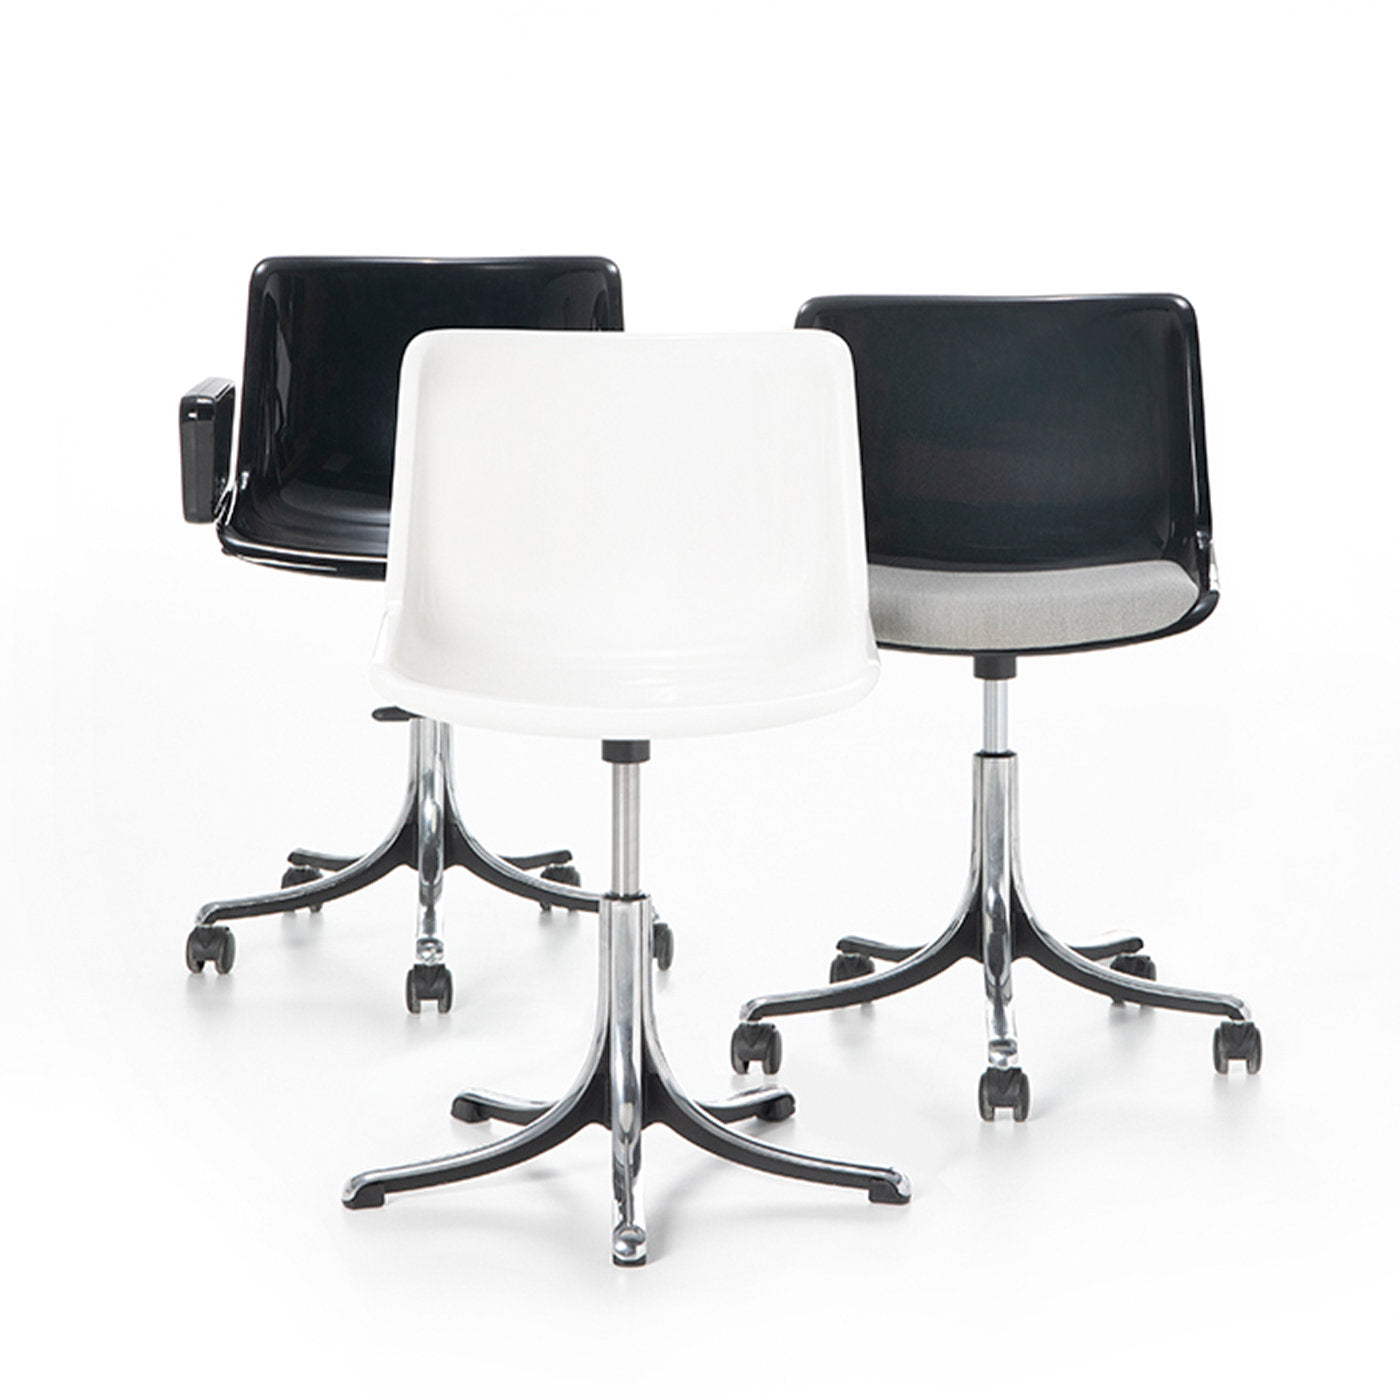 Modus Black Caster Chair with Armrests by Centro Progetti Tecno - Alternative view 1